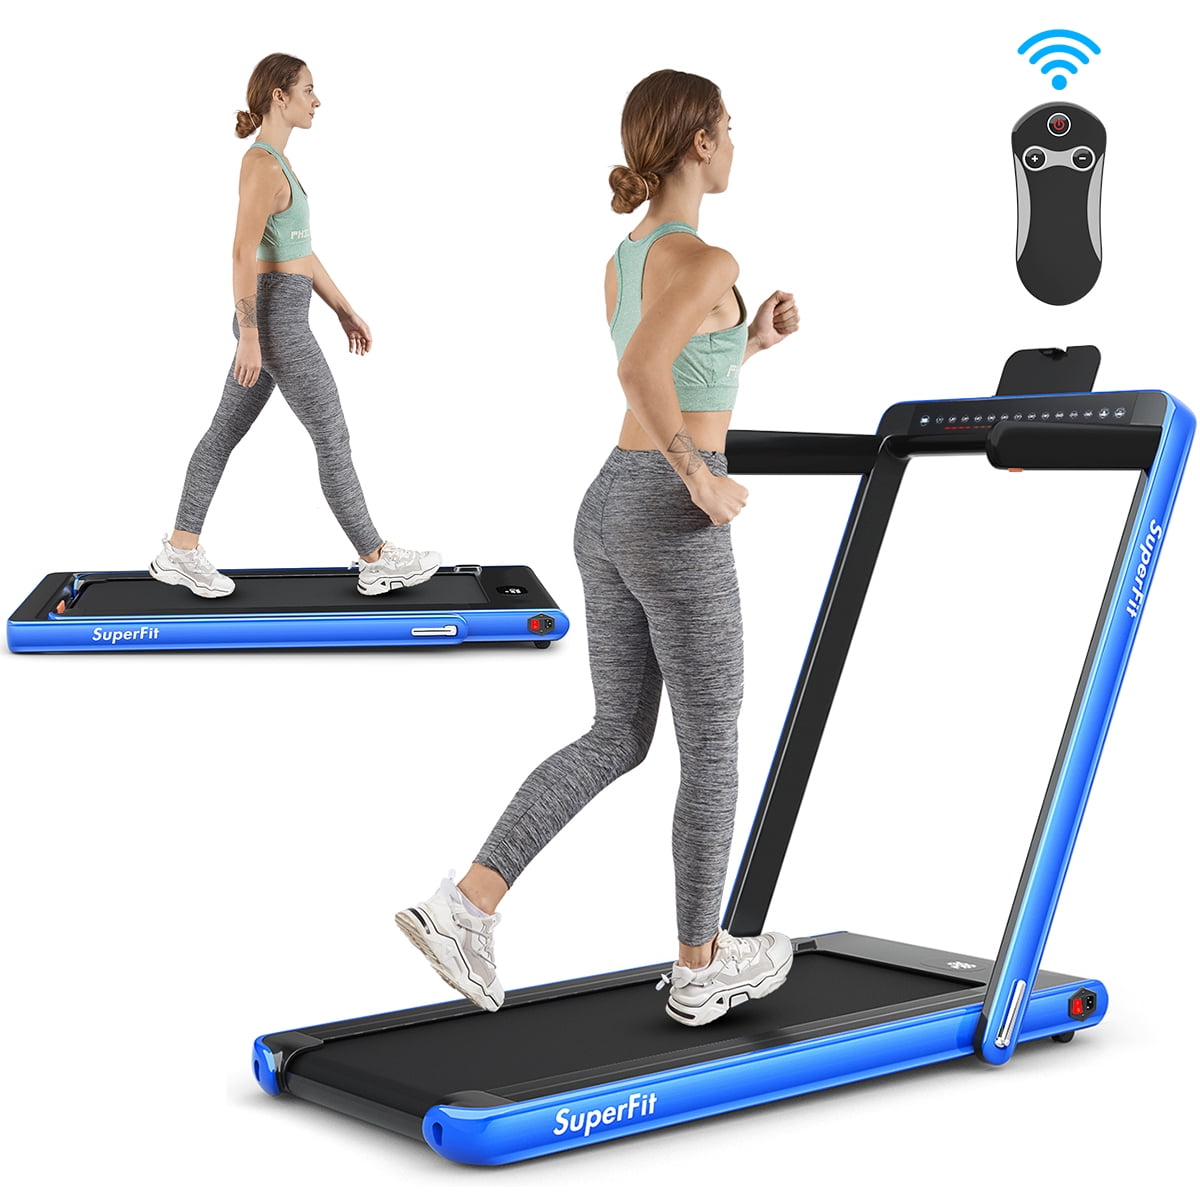 Details about   1HP Under-Desk Walking Jogging Treadmill Home Exercise Machine W/Remote Control 